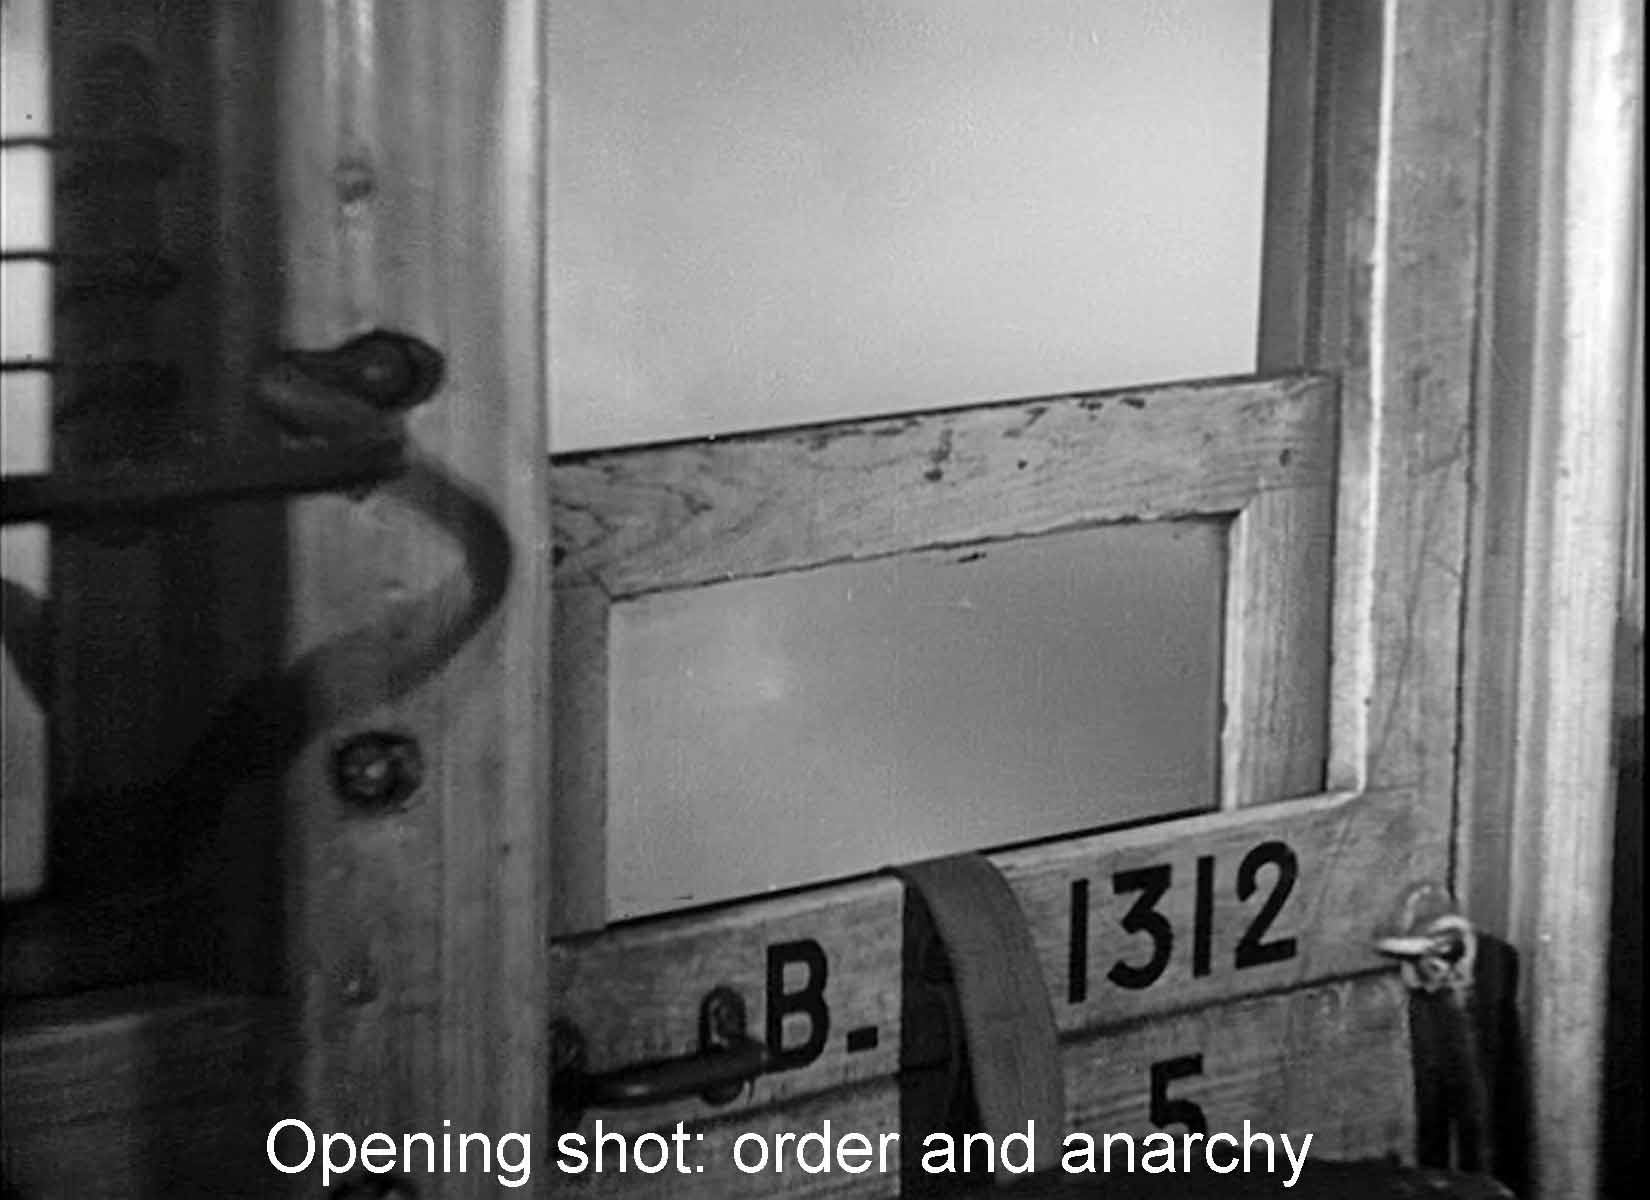 Opening shot: order and anarchy